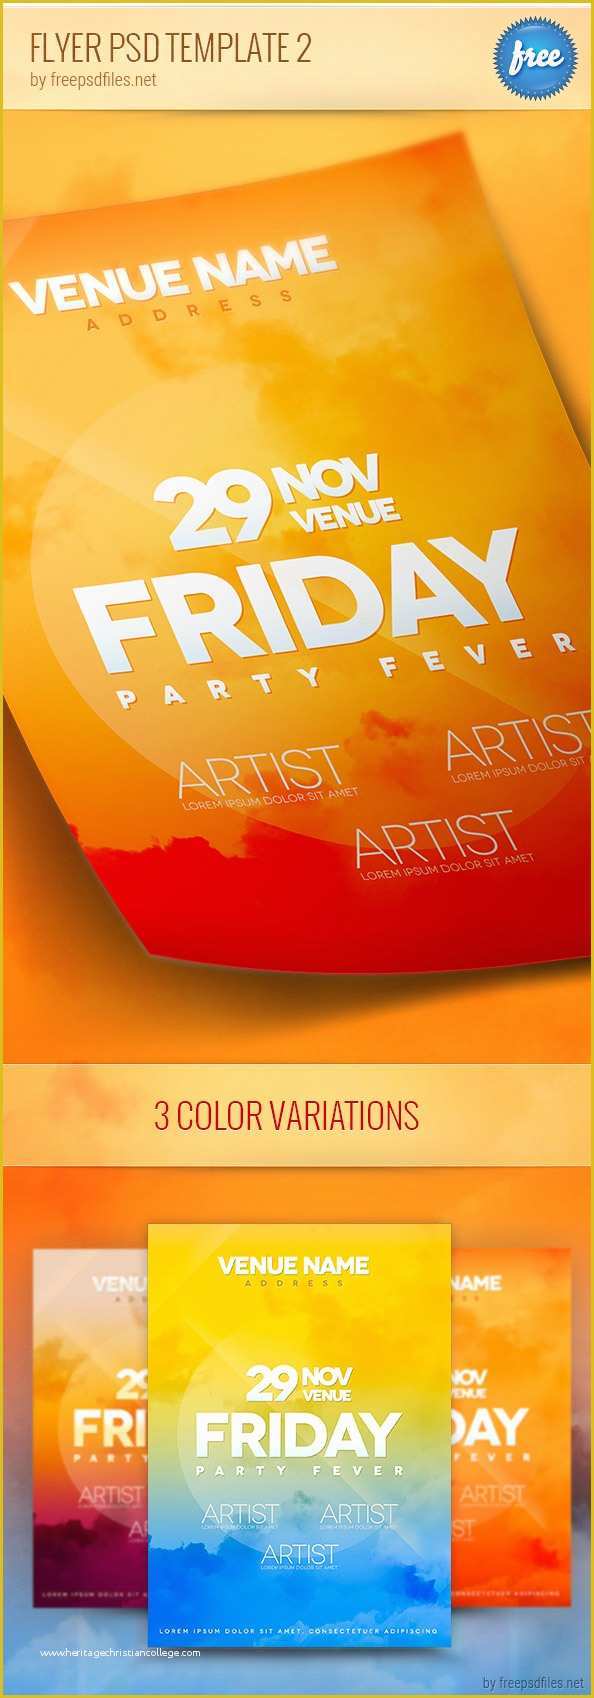 Free Psd Flyer Templates Of Flyer Psd Template 2 Free Psd Files